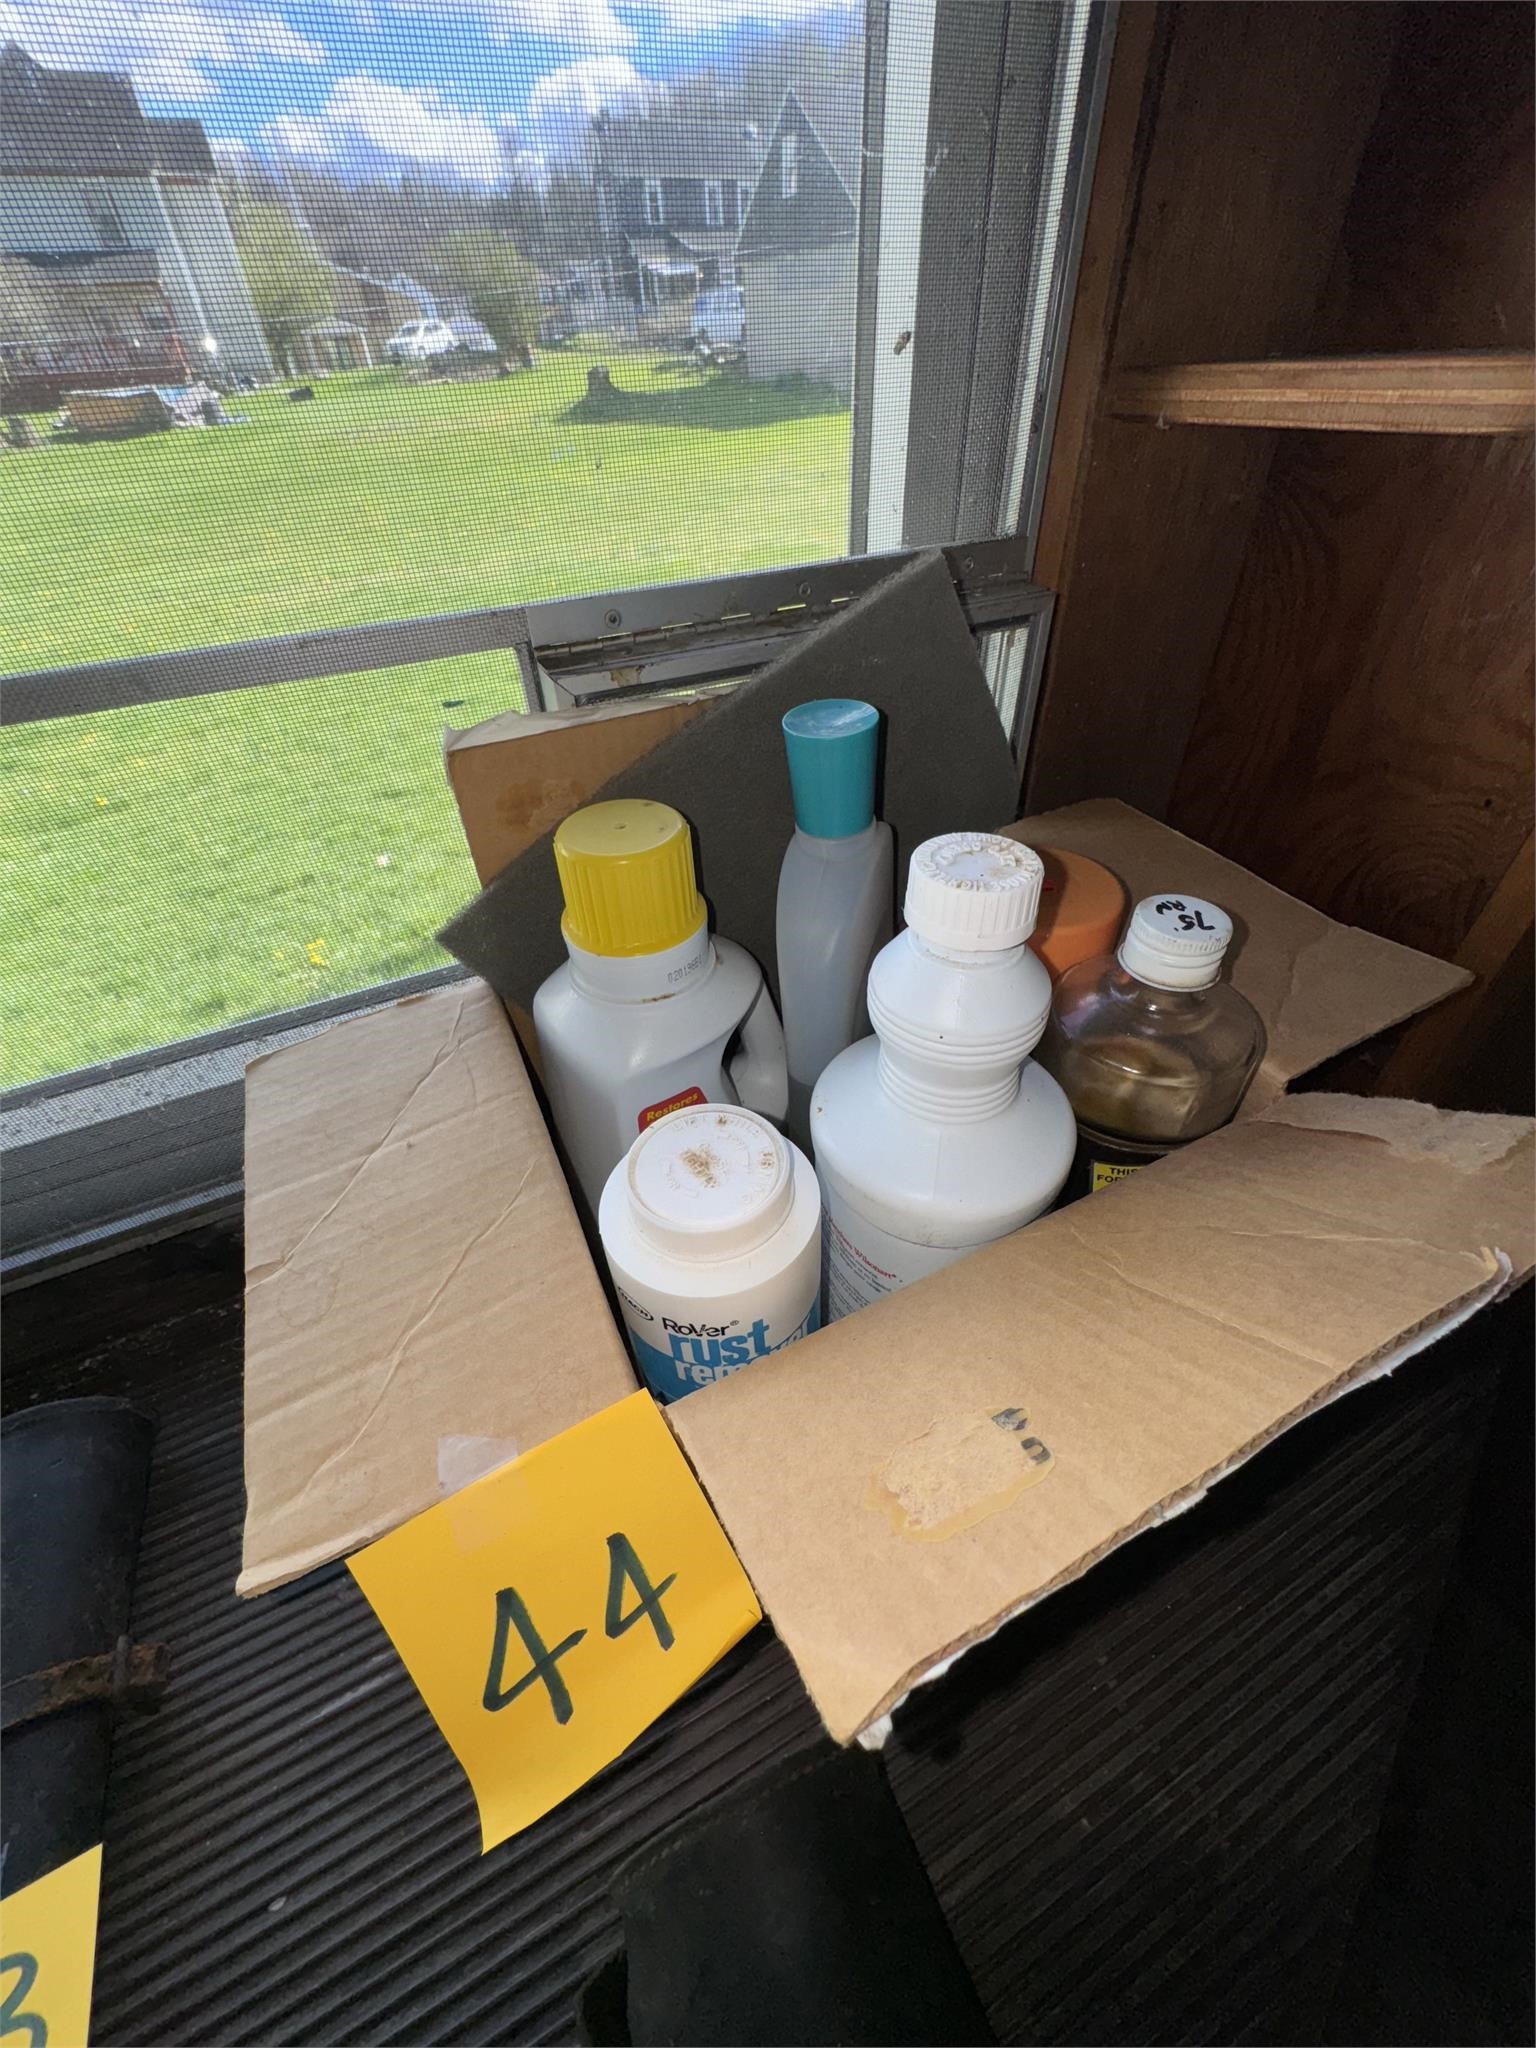 170 Sell Street Johnstown Online Auction Only